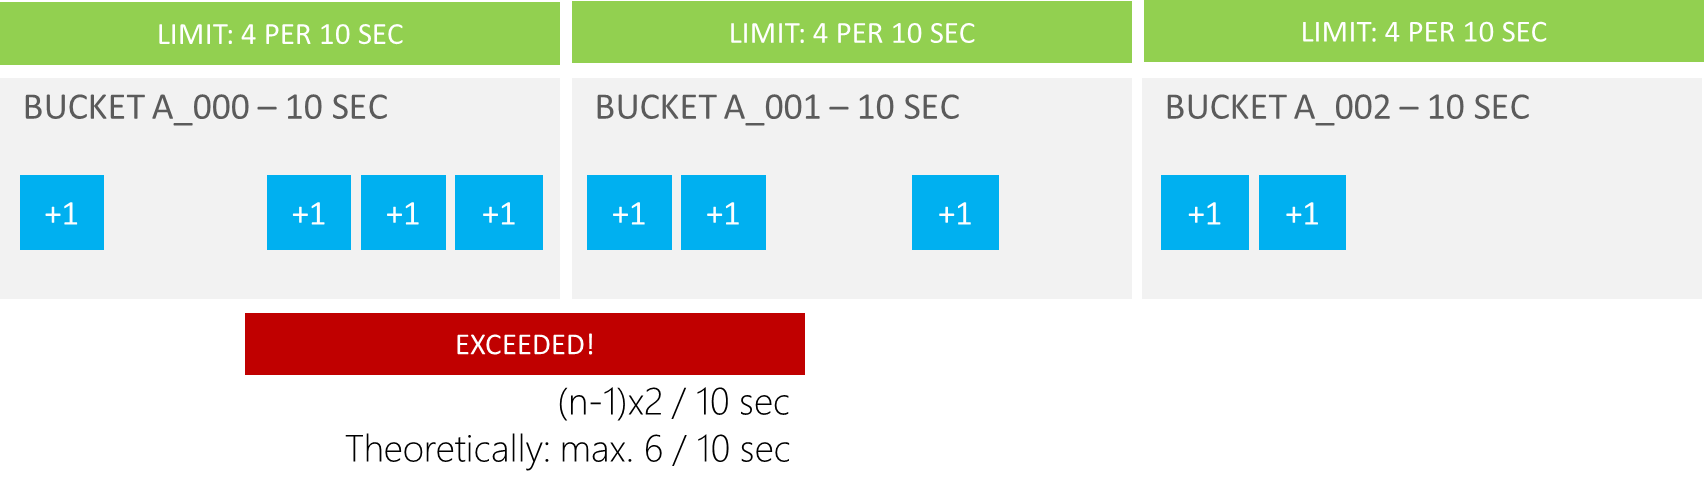 Fixed window limit / Quantized bucket requests may exceed expected limit